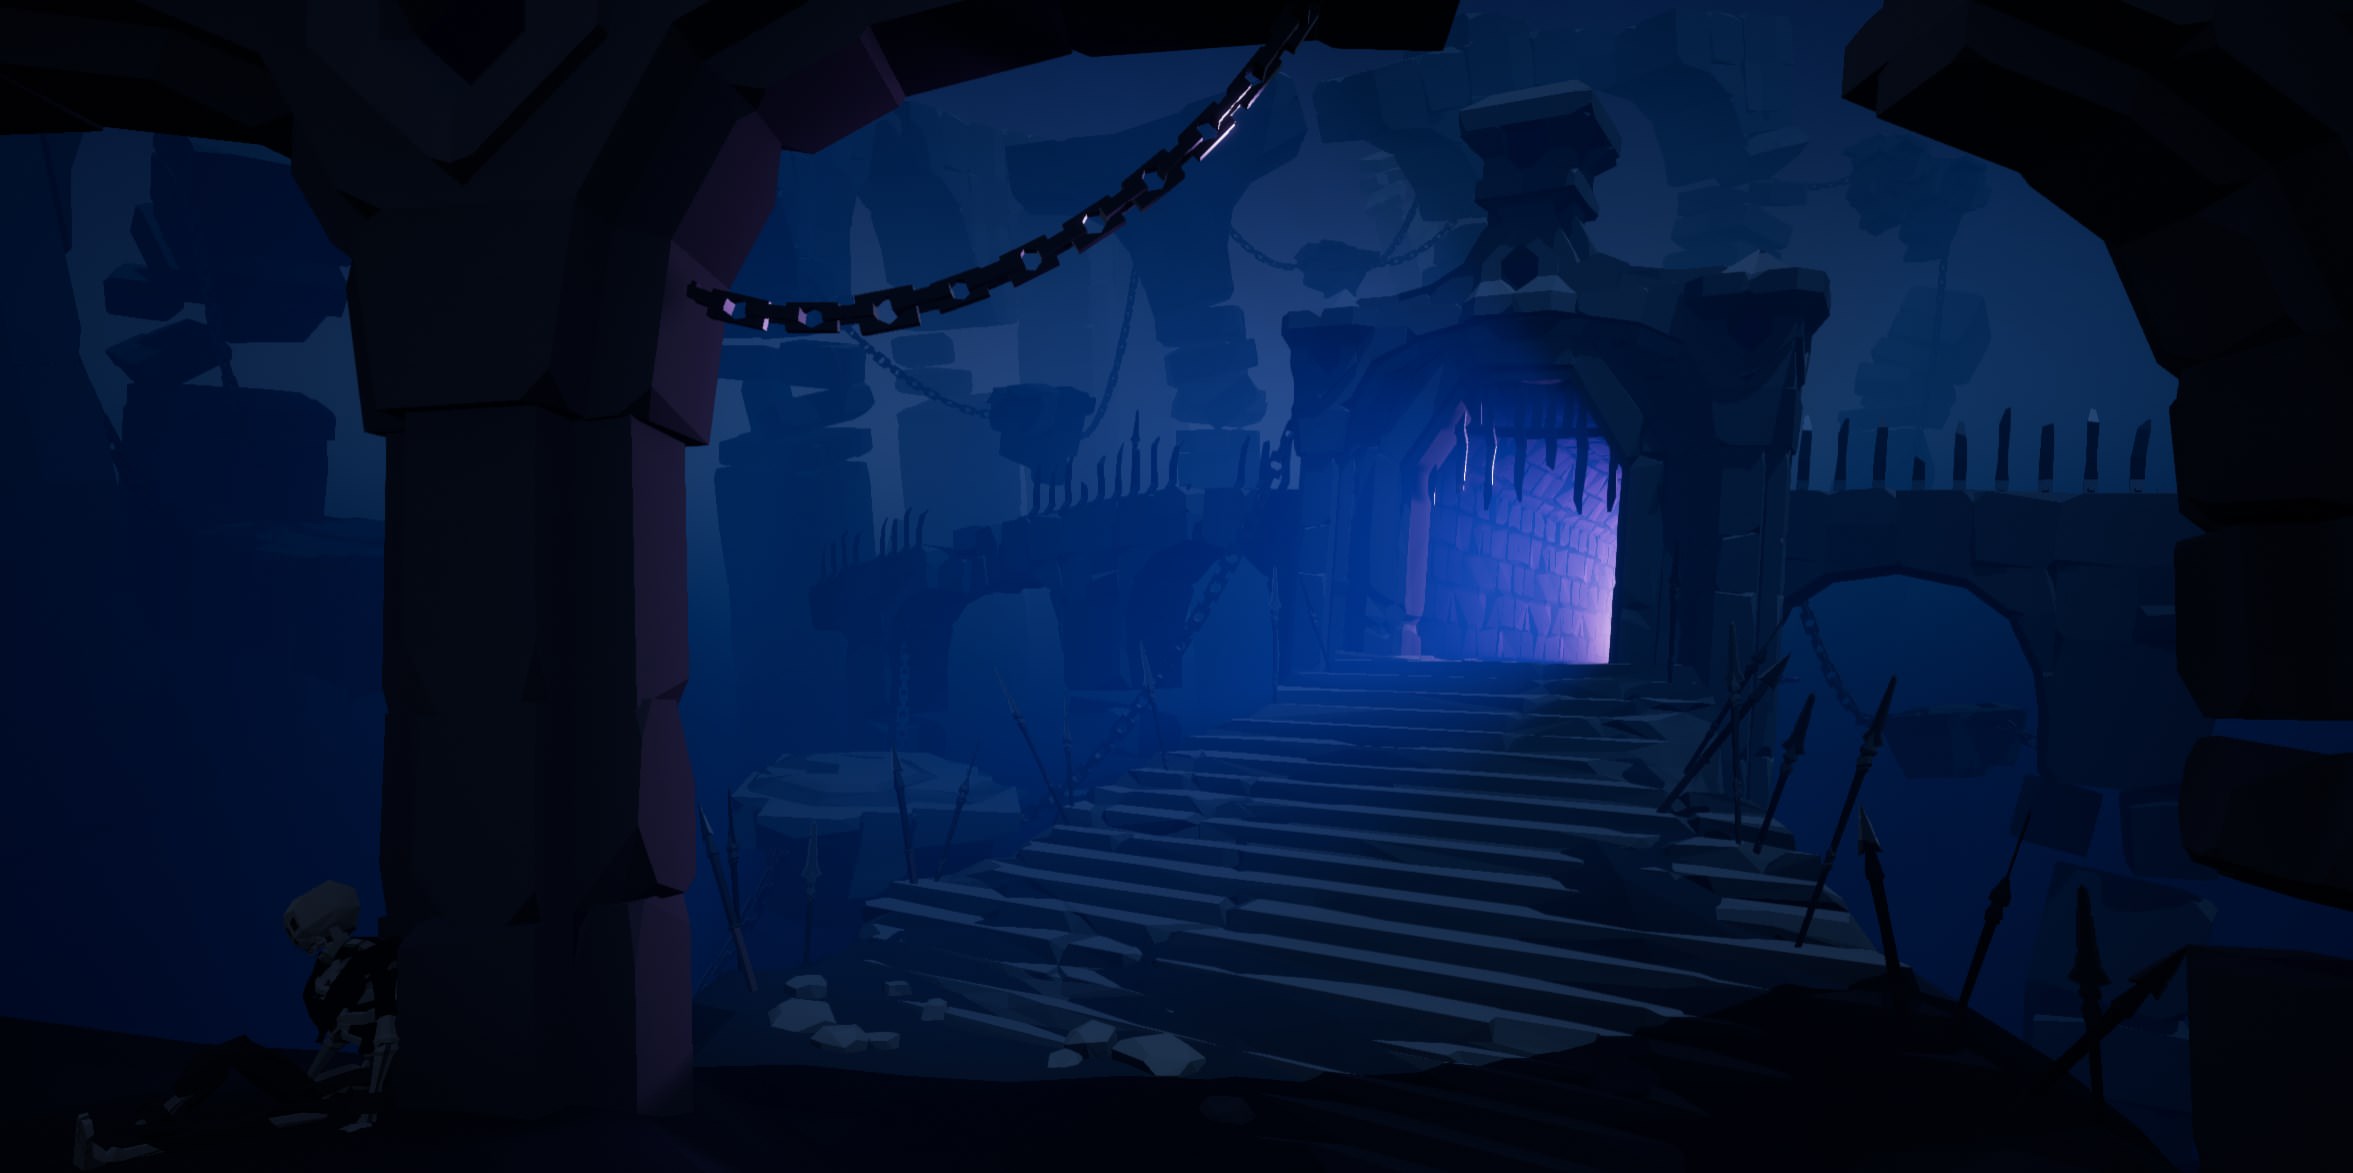 Spent 10 hours yesterday on the main menu background for this dungeon crawler I'm making